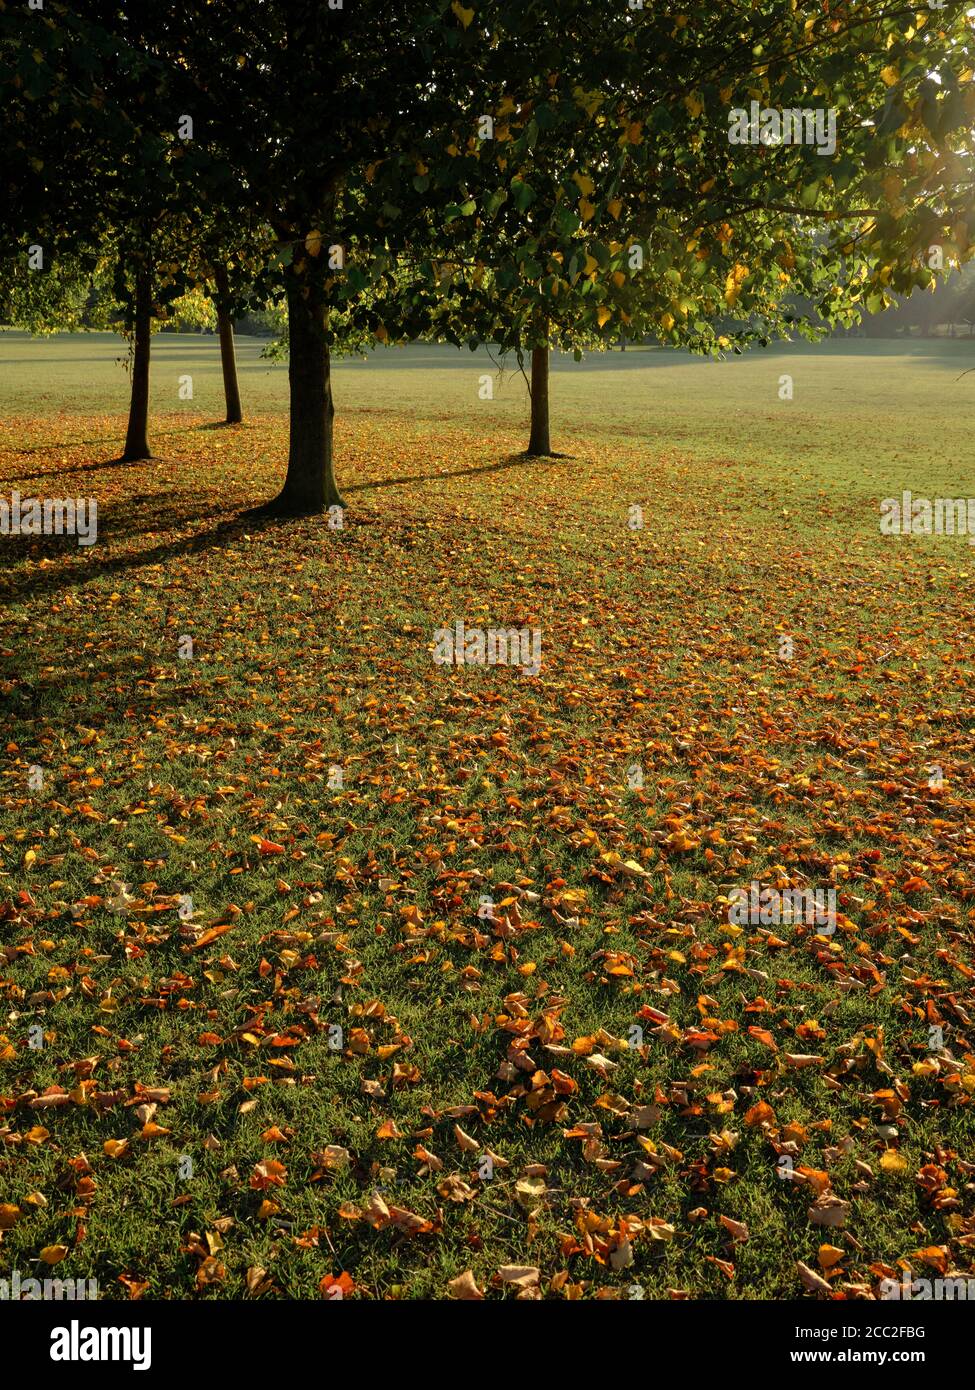 Late Summer Early Autumn Season - fallen leaves and trees in a parkland nature background. Stock Photo